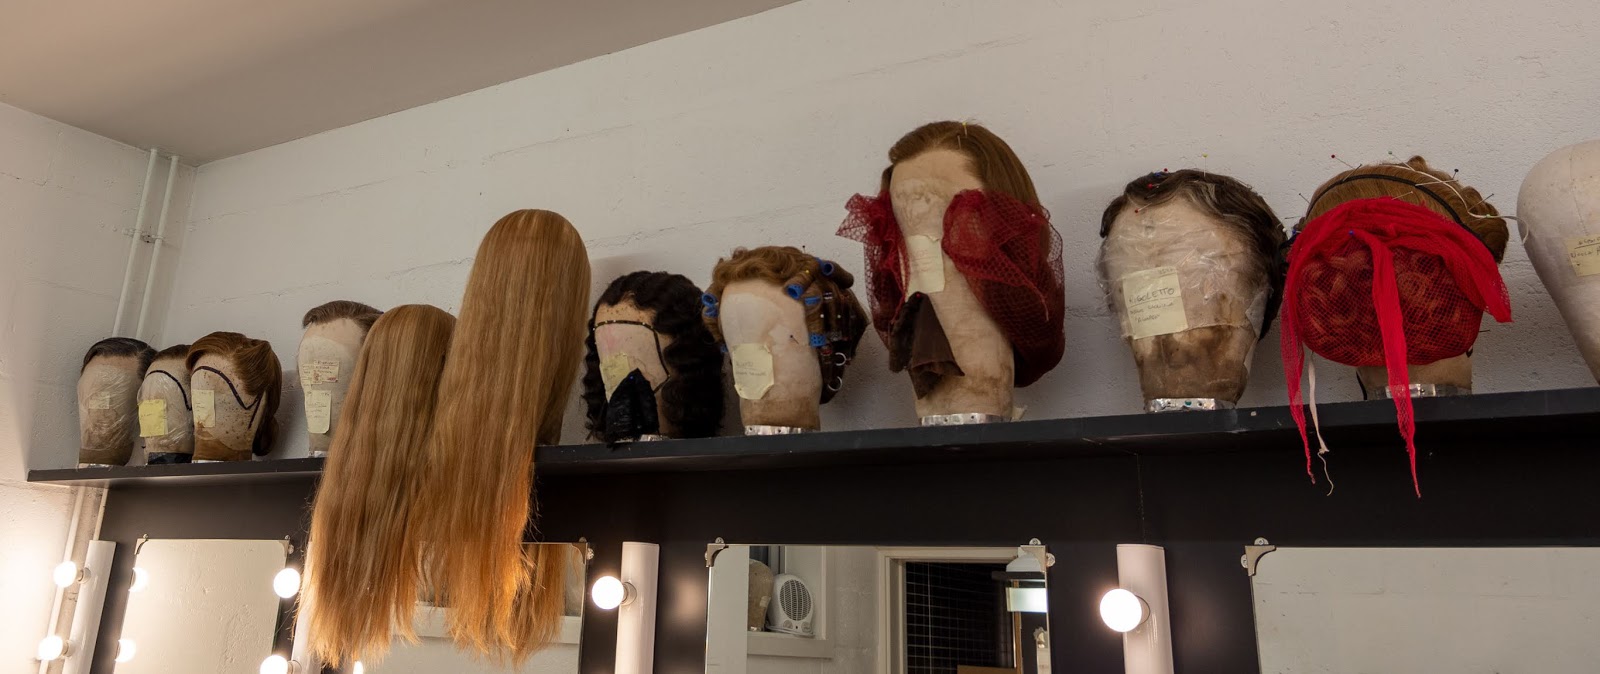 Glyndebourne production wigs in one of the Marlowe Theatre dressing rooms